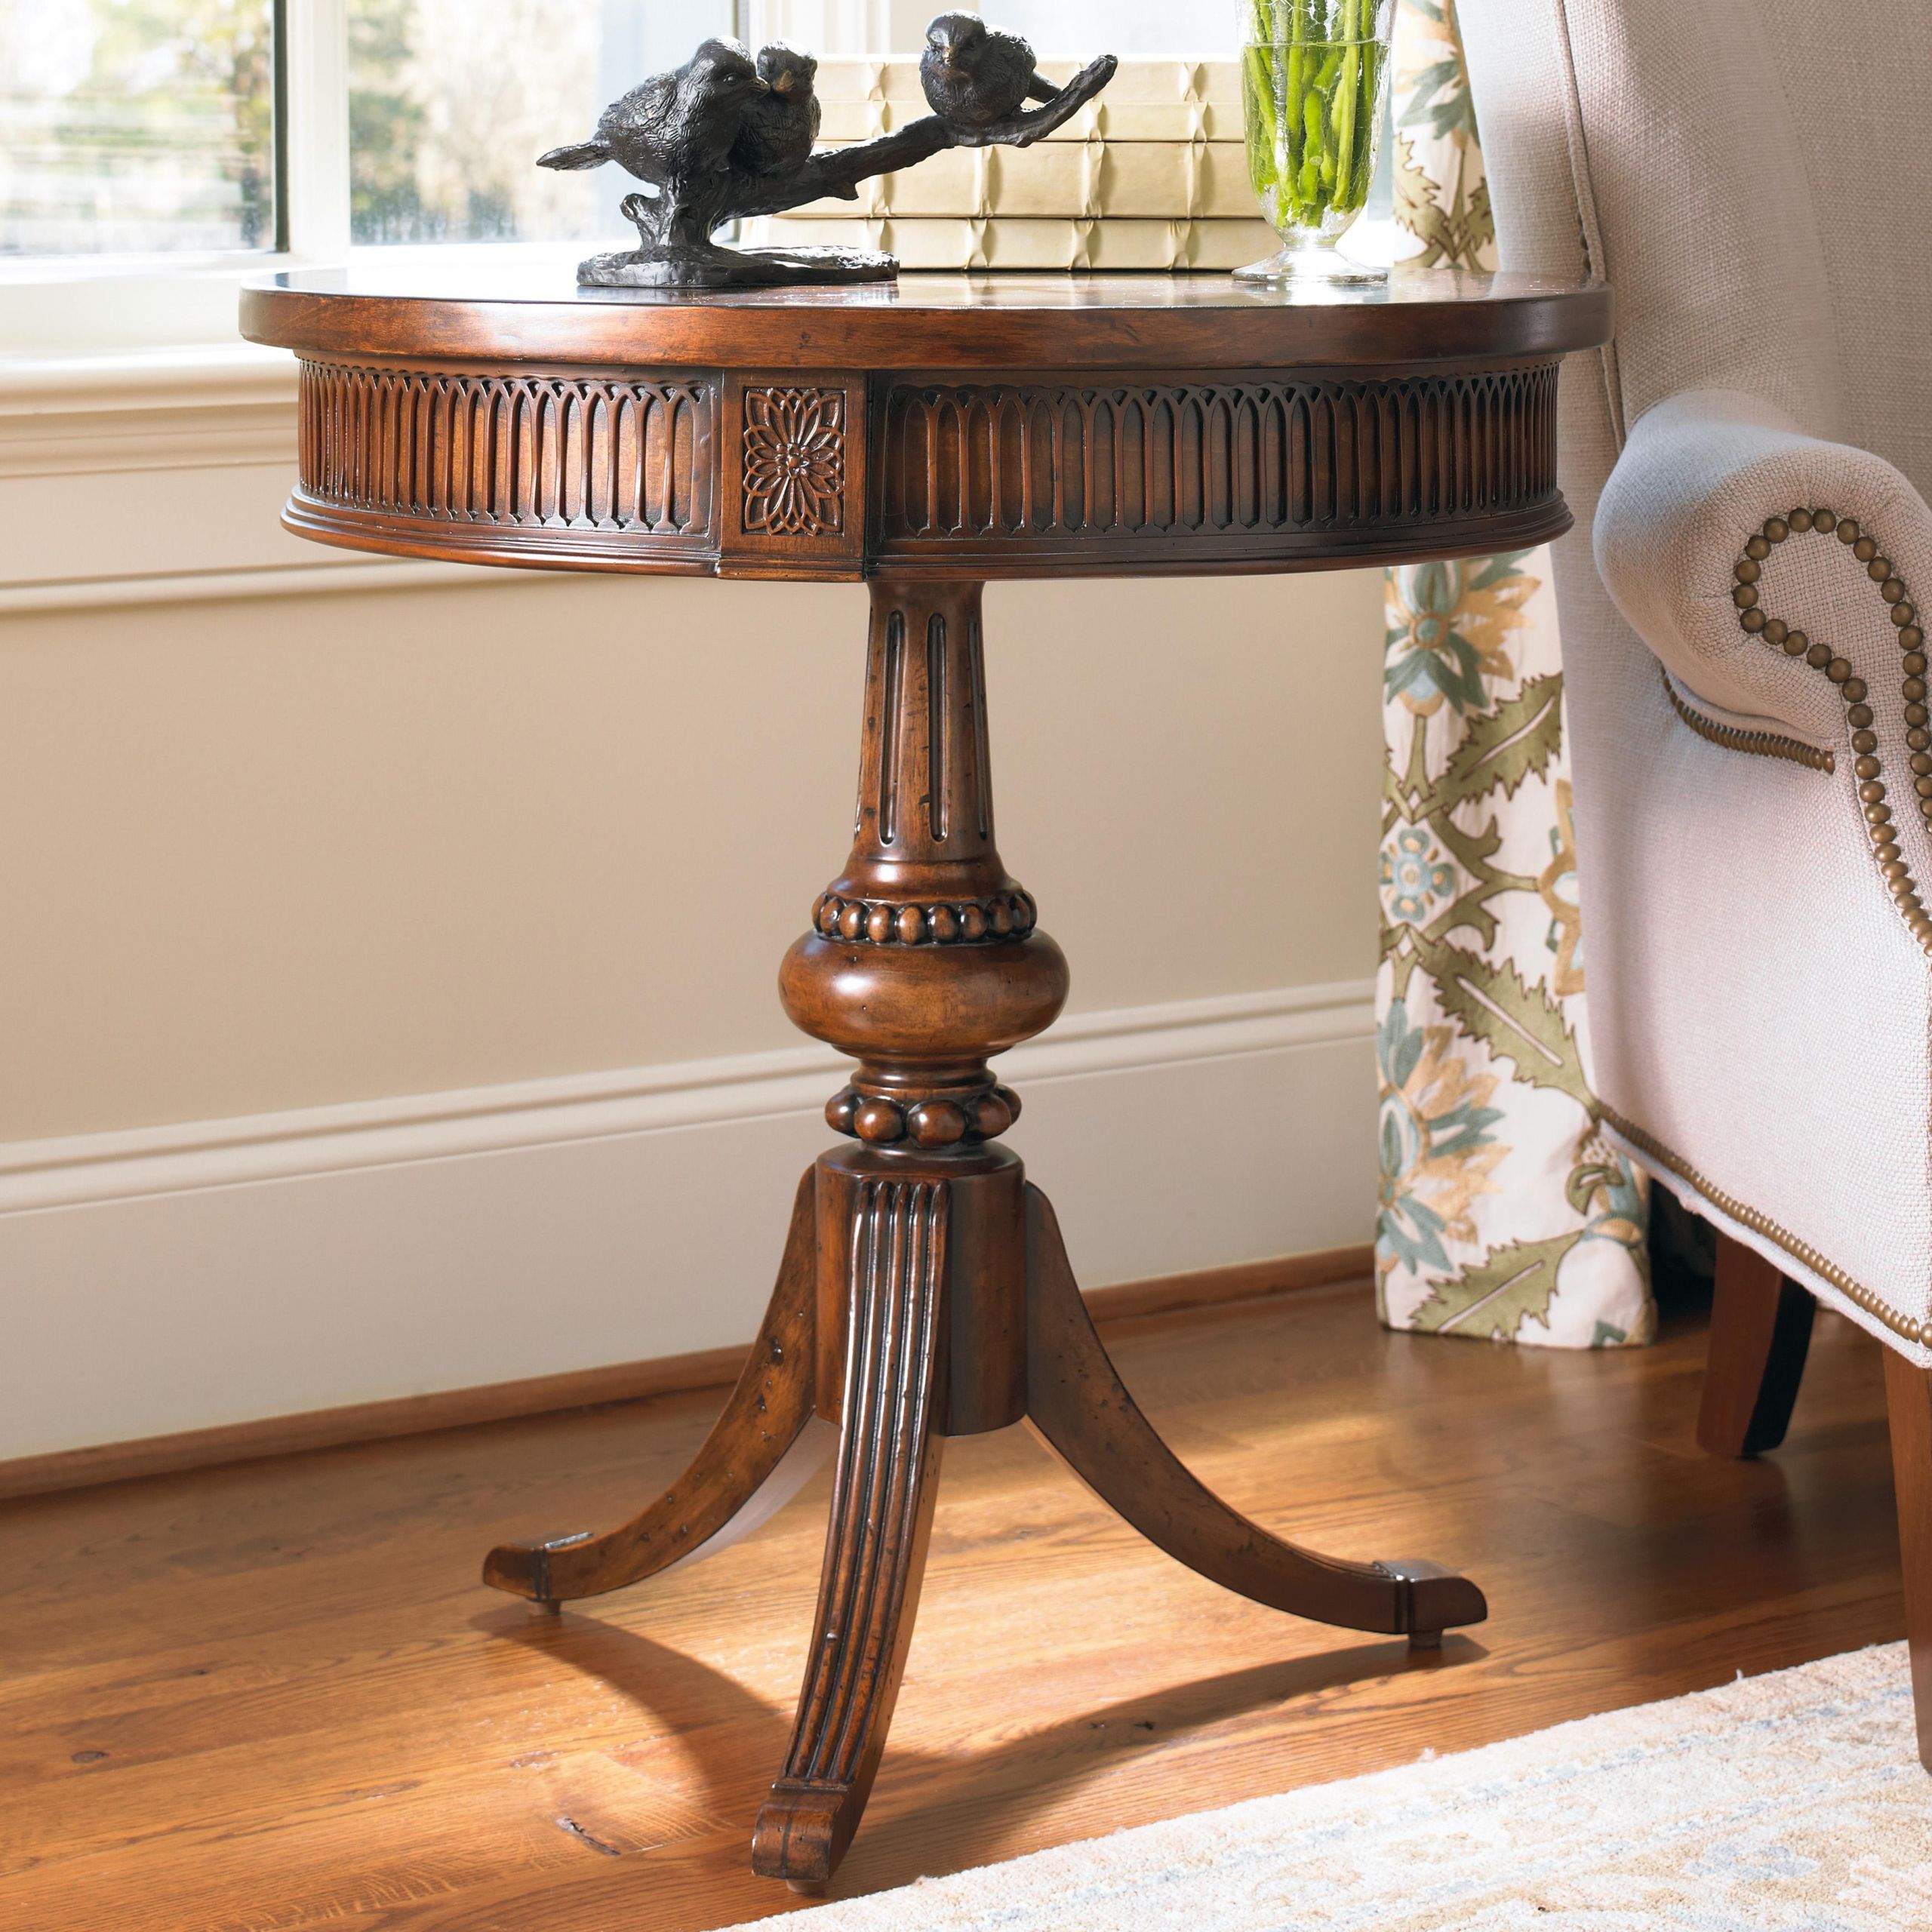 Side Table For Living Room
 Hooker Furniture Living Room Accents Round Accent Table